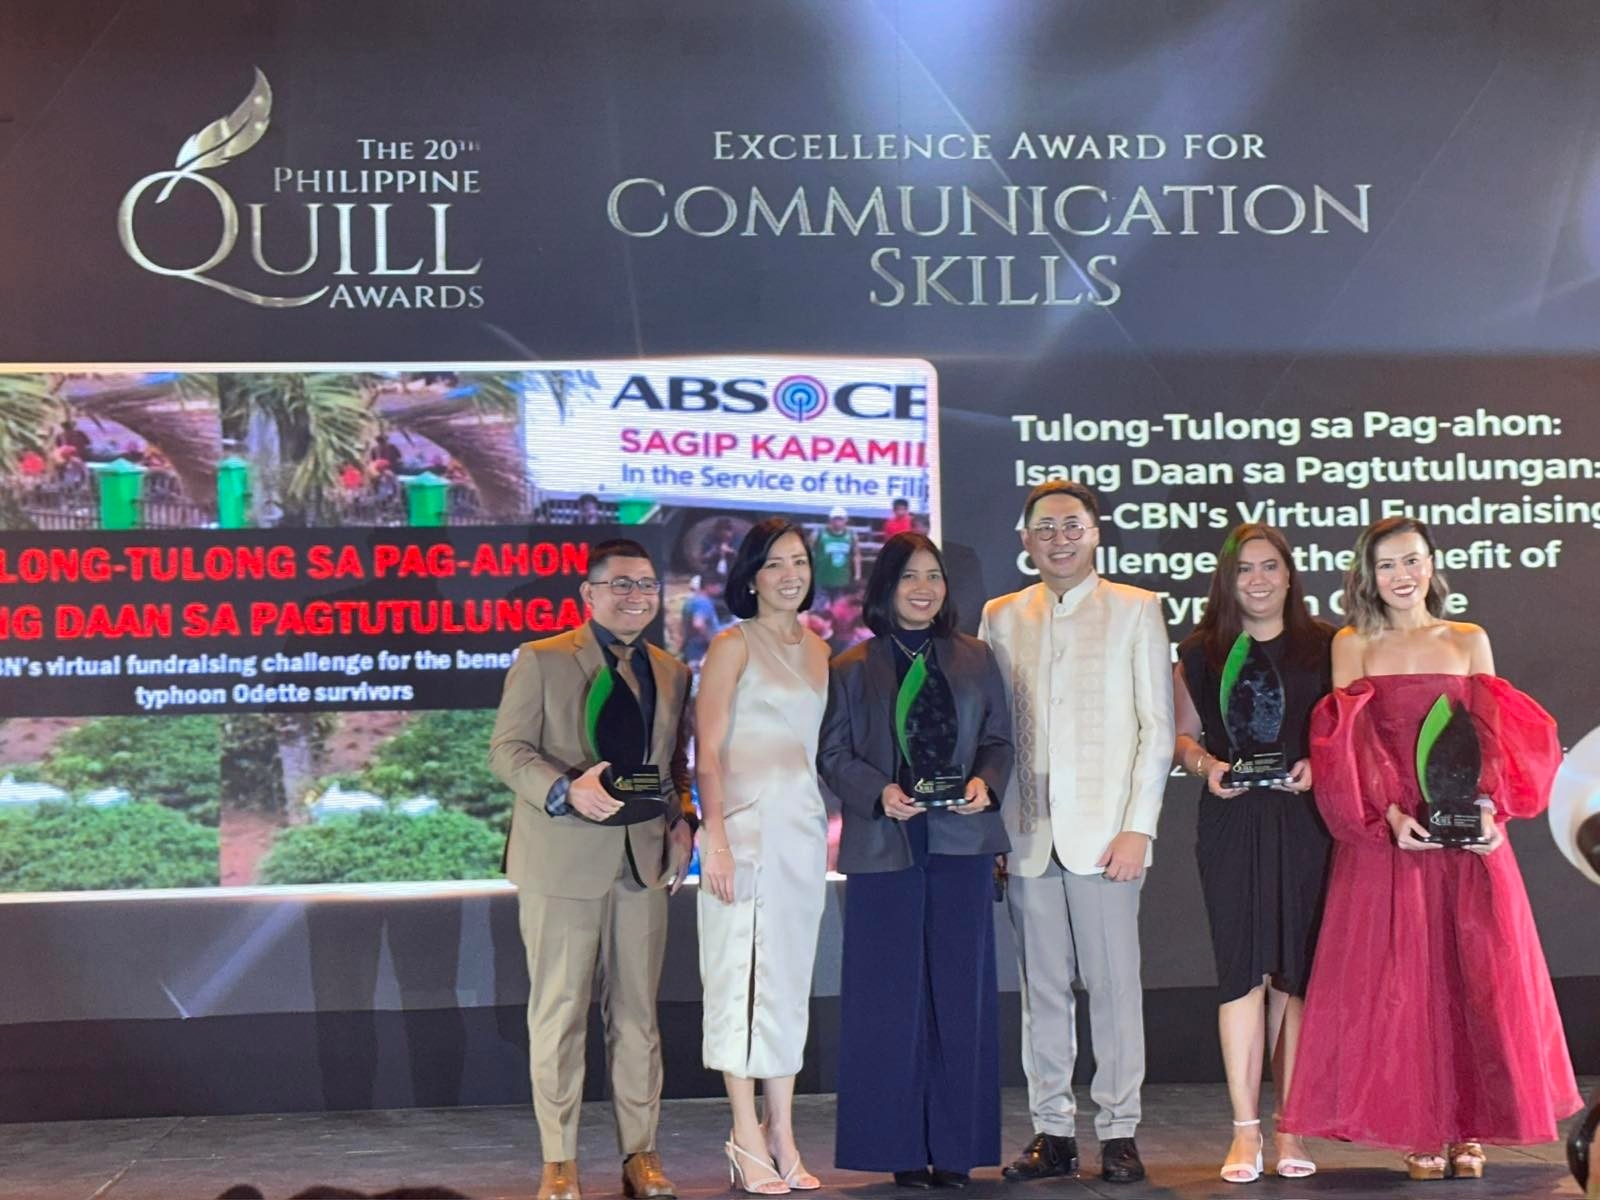 ABS-CBN scores three big wins at the 20th Philippine Quill Awards